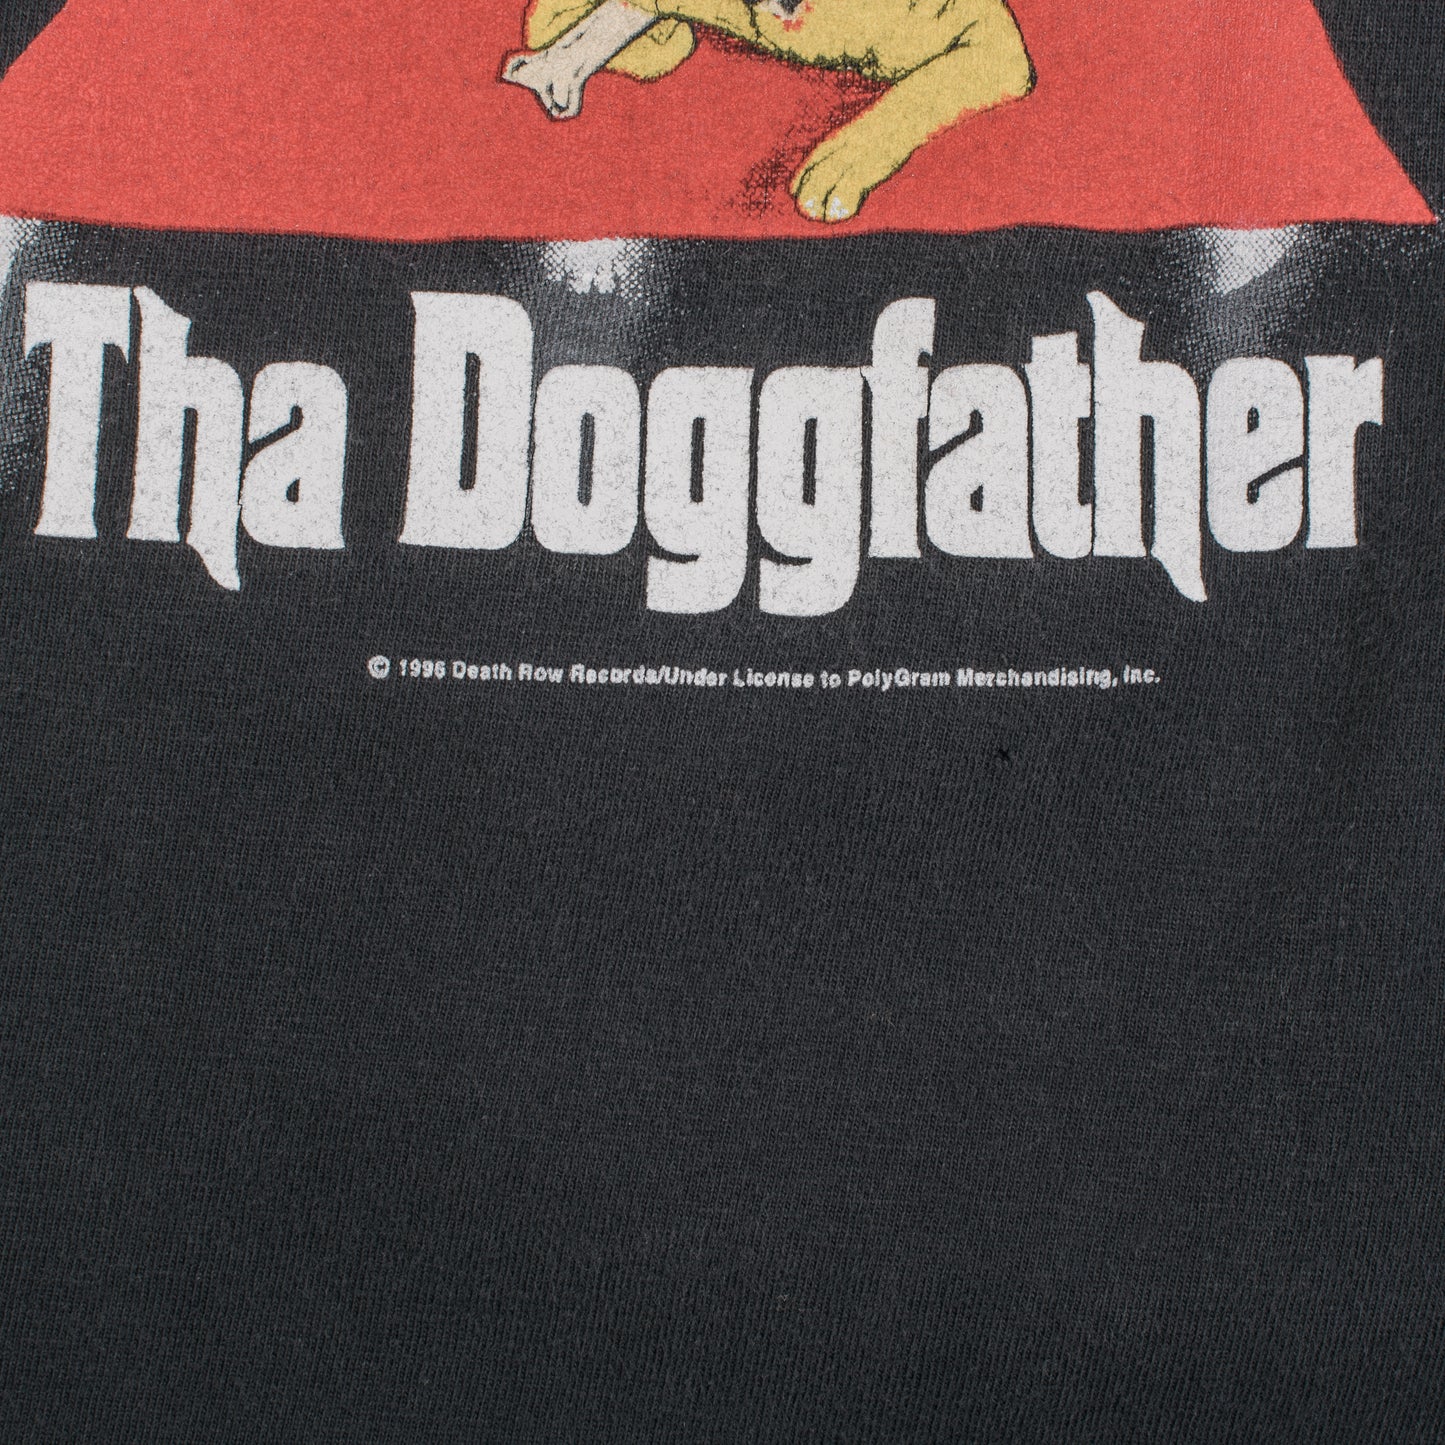 Vintage 1995 Snoop Doggy Dogg The Doggfather T-Shirt